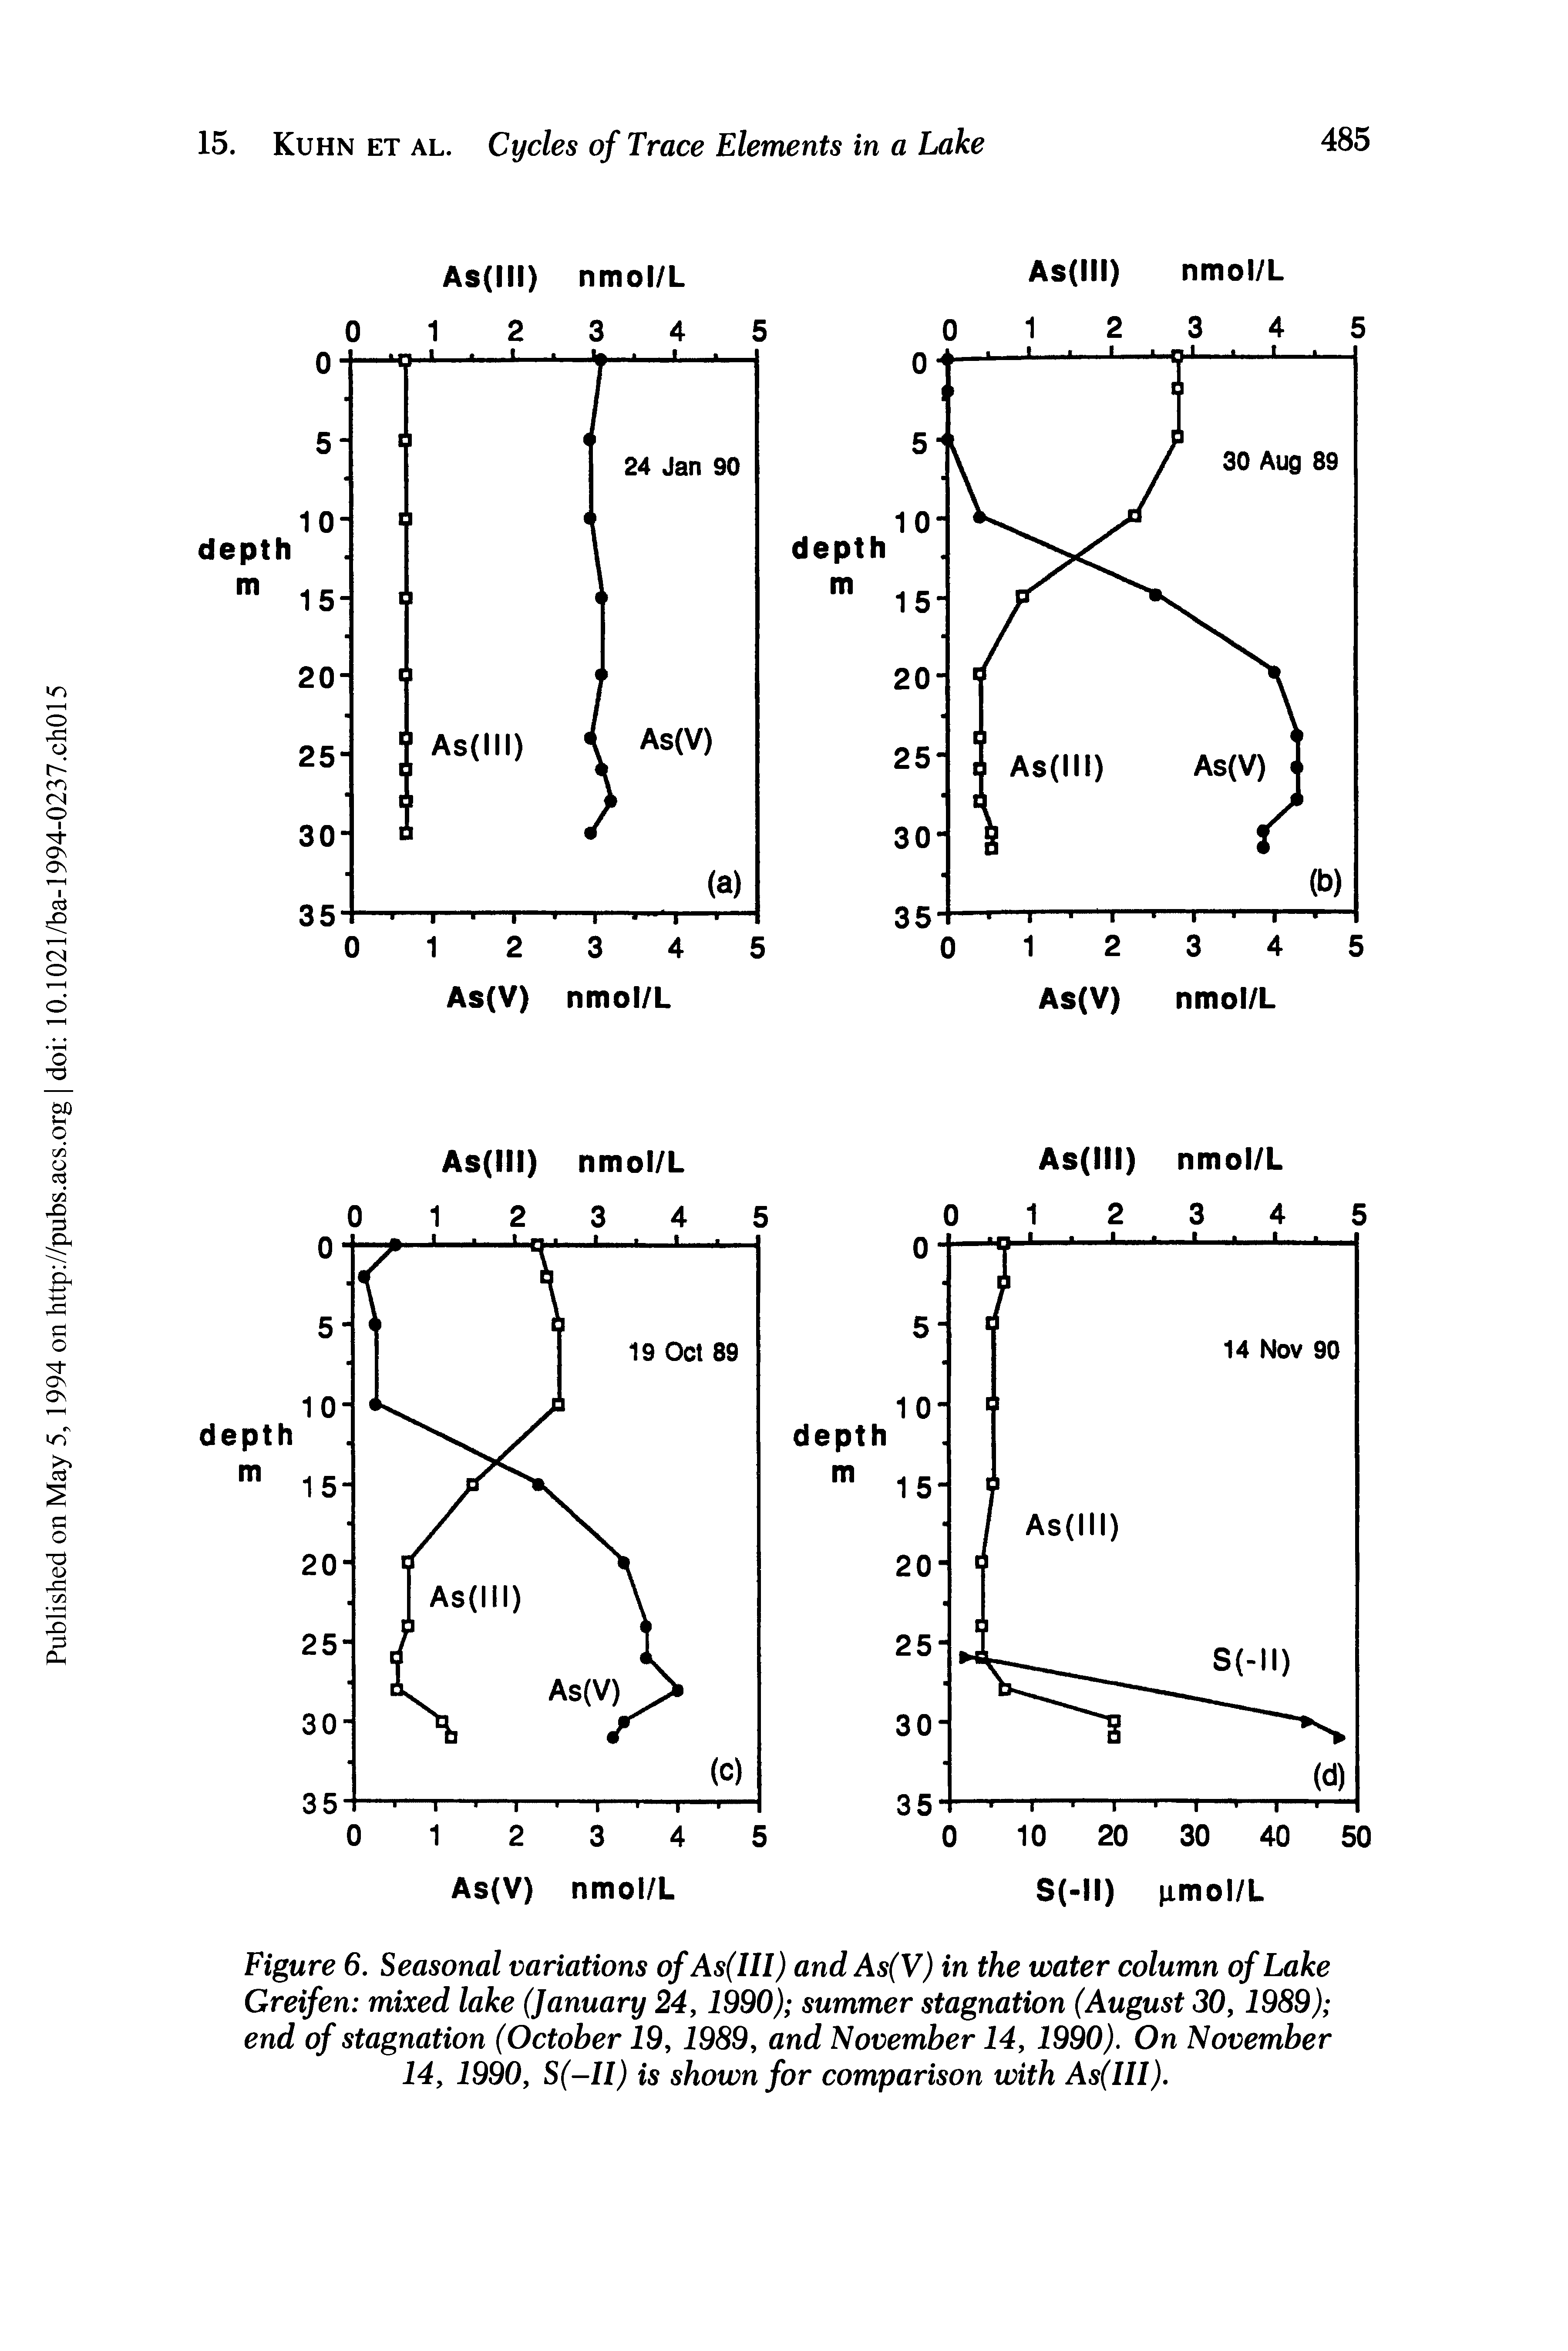 Figure 6. Seasonal variations of As(III)and As(V) in the water column of Lake Greifen mixed lake (January 24,1990) summer stagnation (August 30, 1989) end of stagnation (October 19, 1989, and November 14, 1990). On November 14, 1990, S(-II) is shown for comparison with As(III).